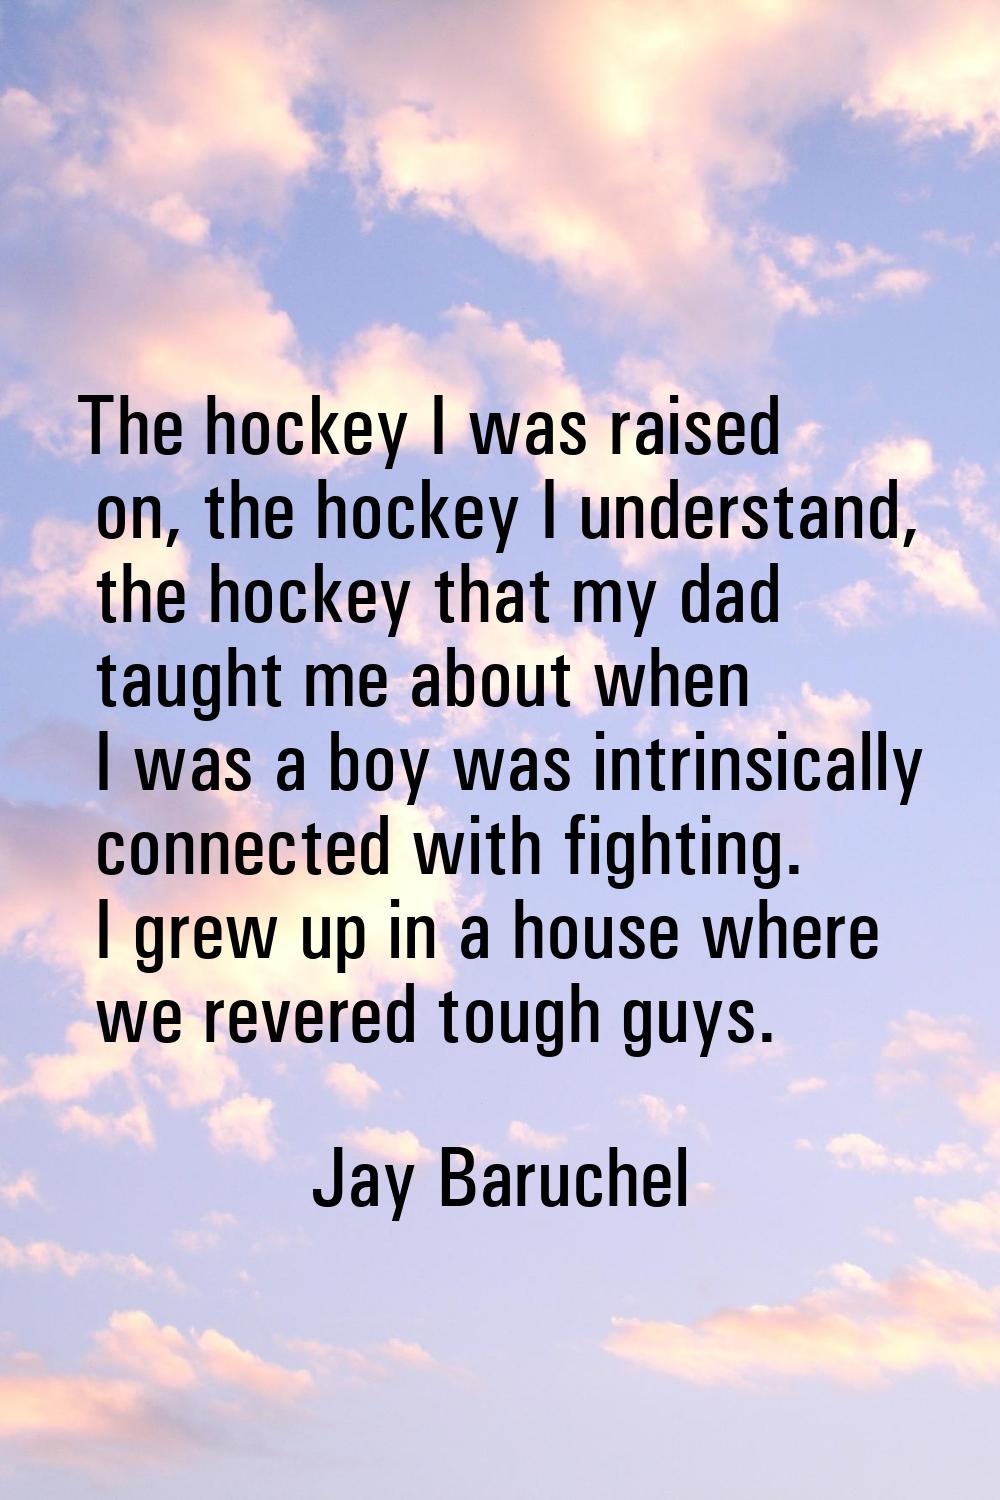 The hockey I was raised on, the hockey I understand, the hockey that my dad taught me about when I 